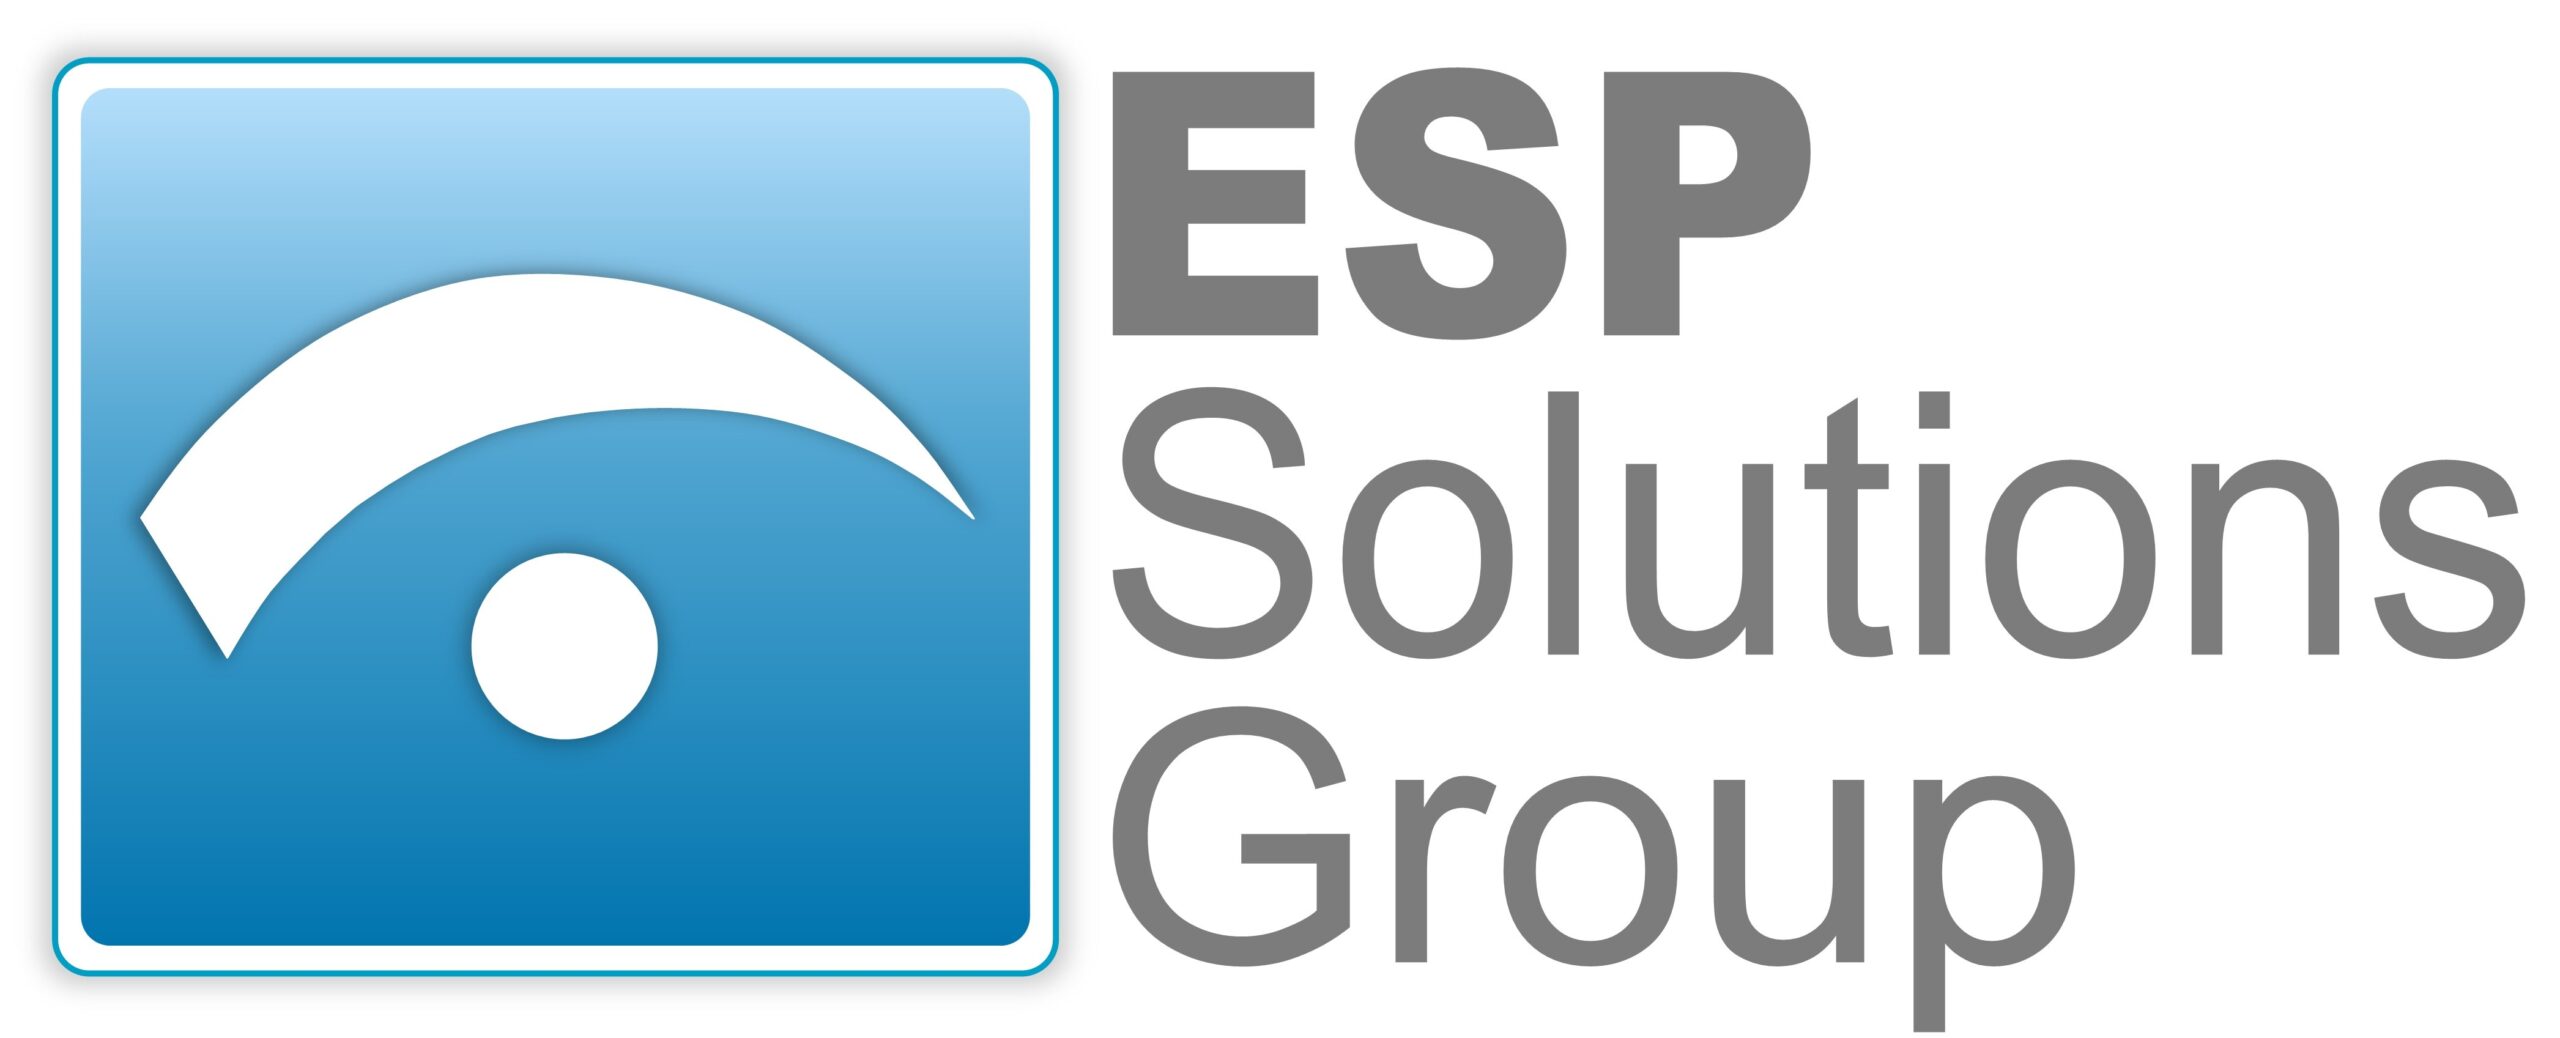 ESP Solutions Group